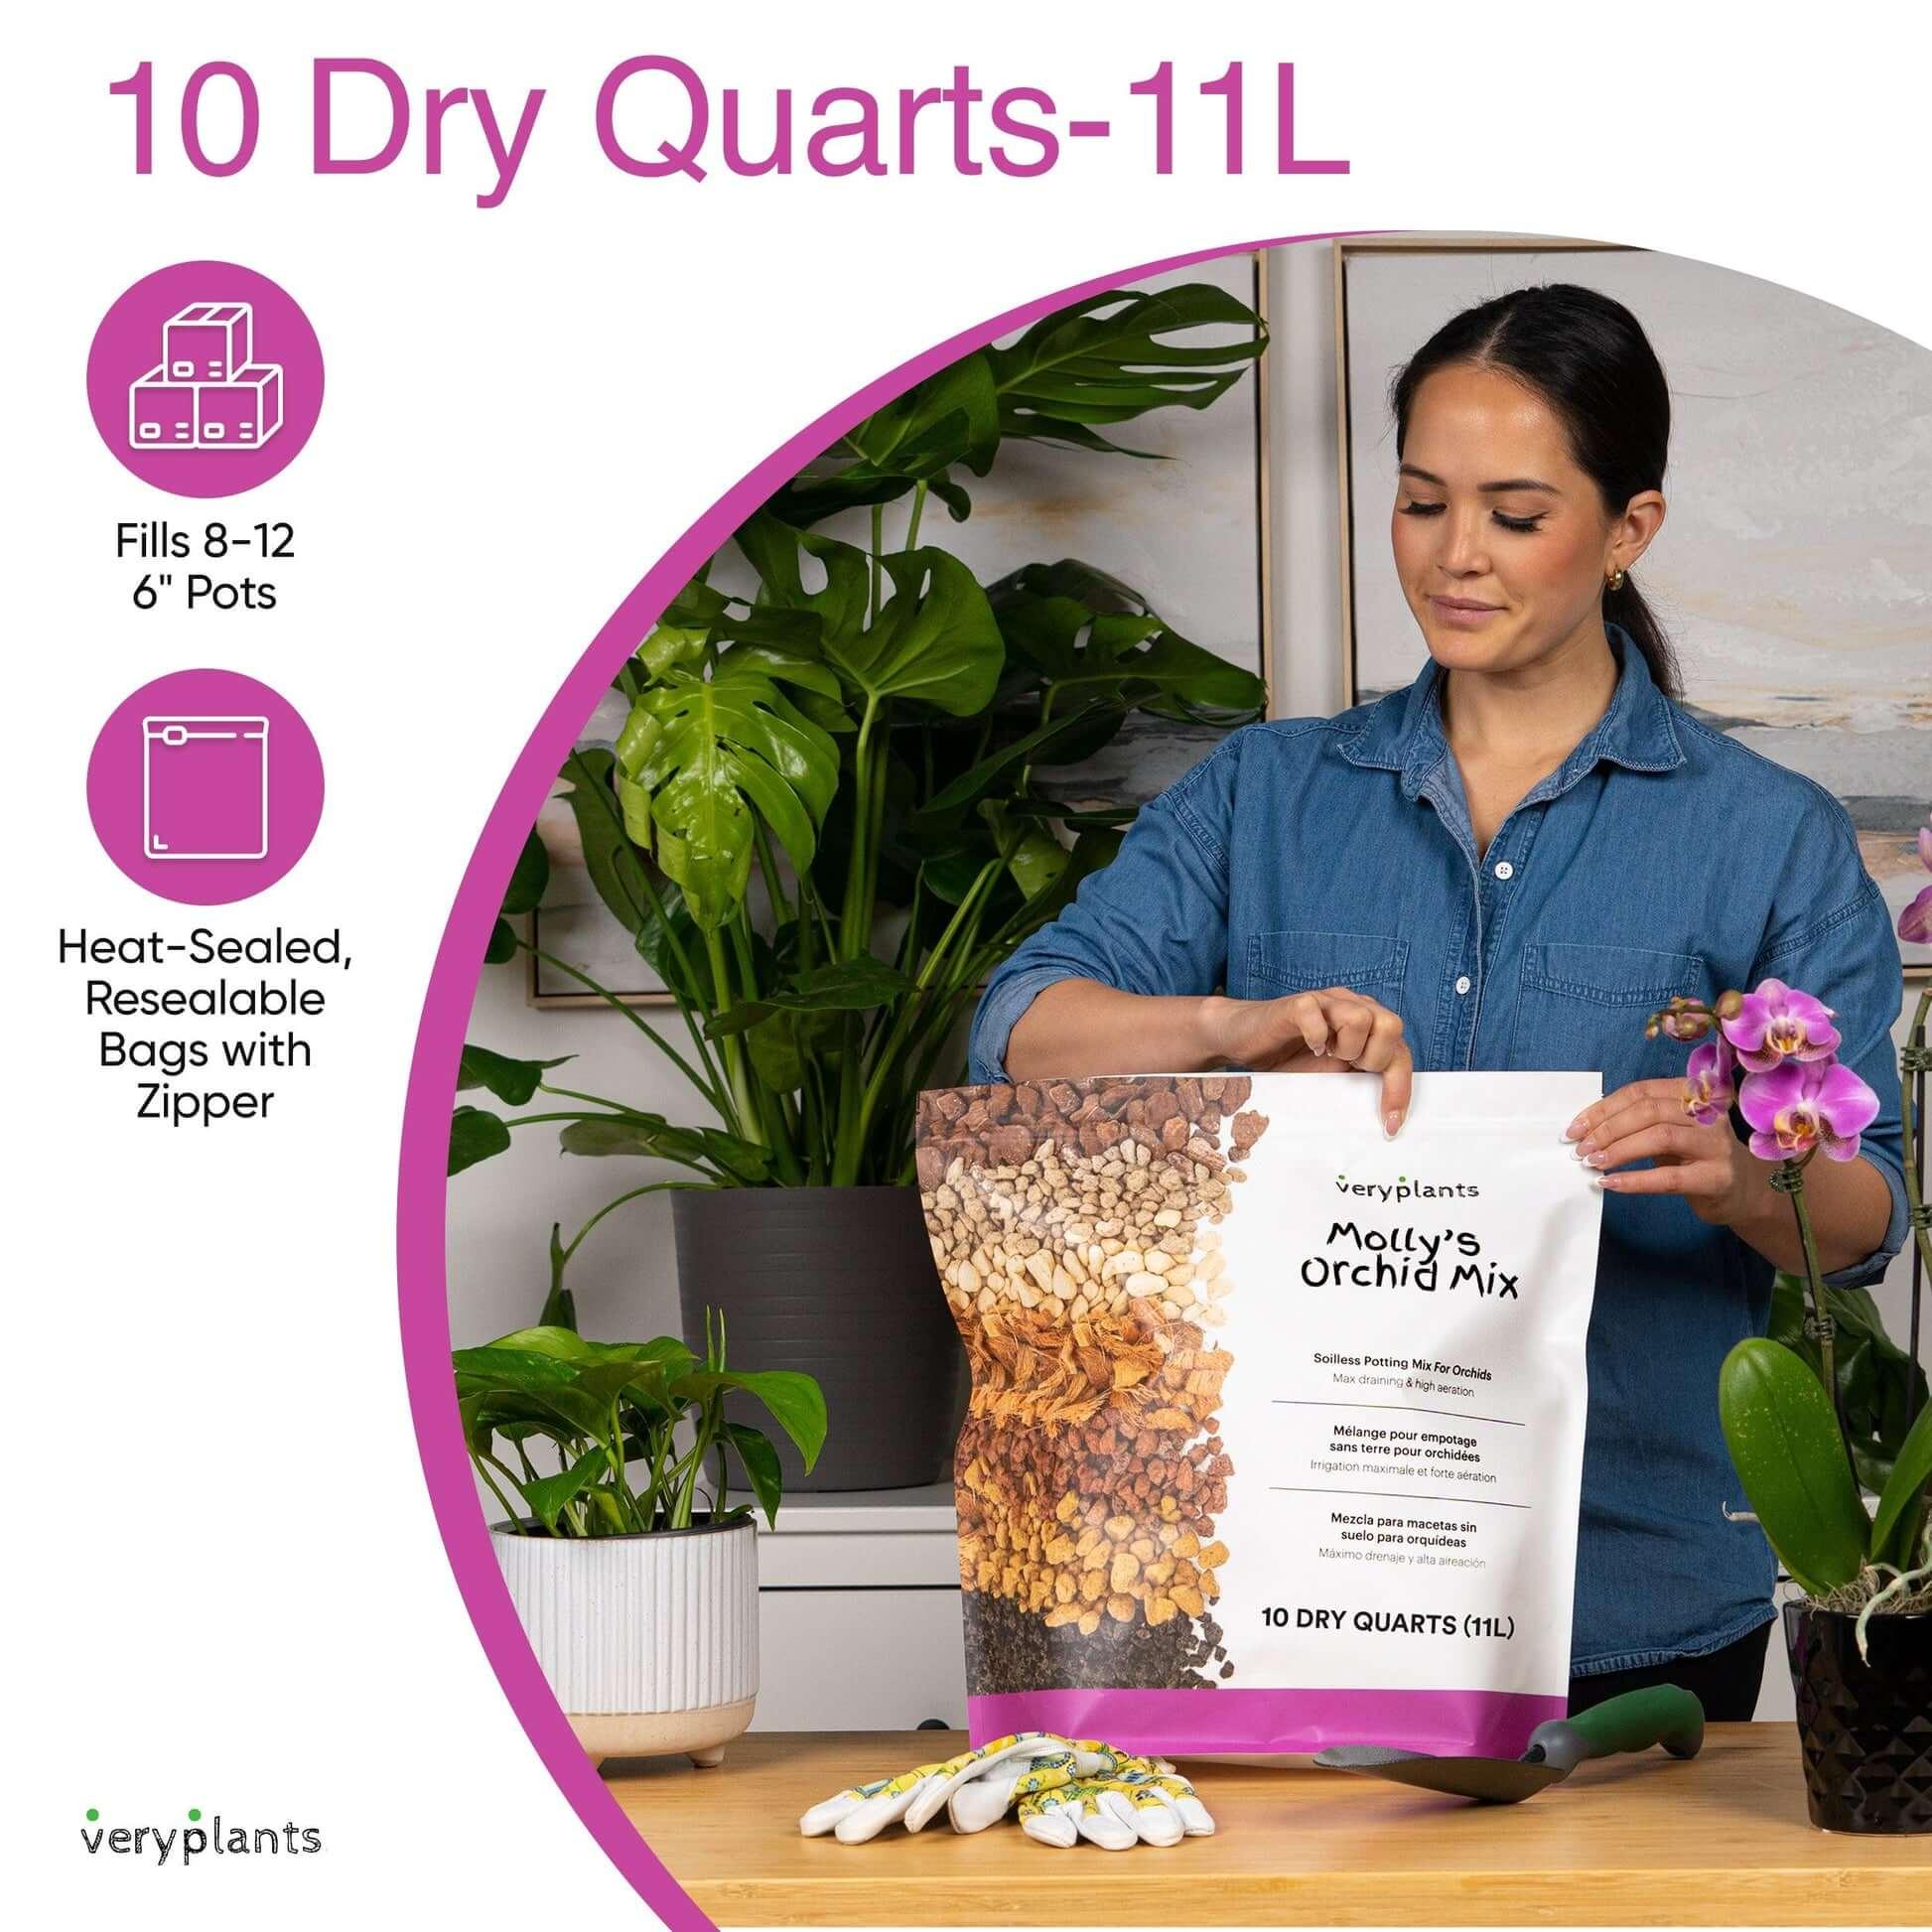 Molly's Orchid Mix - Premium Soilless Orchid Potting Mix - VERYPLANTS